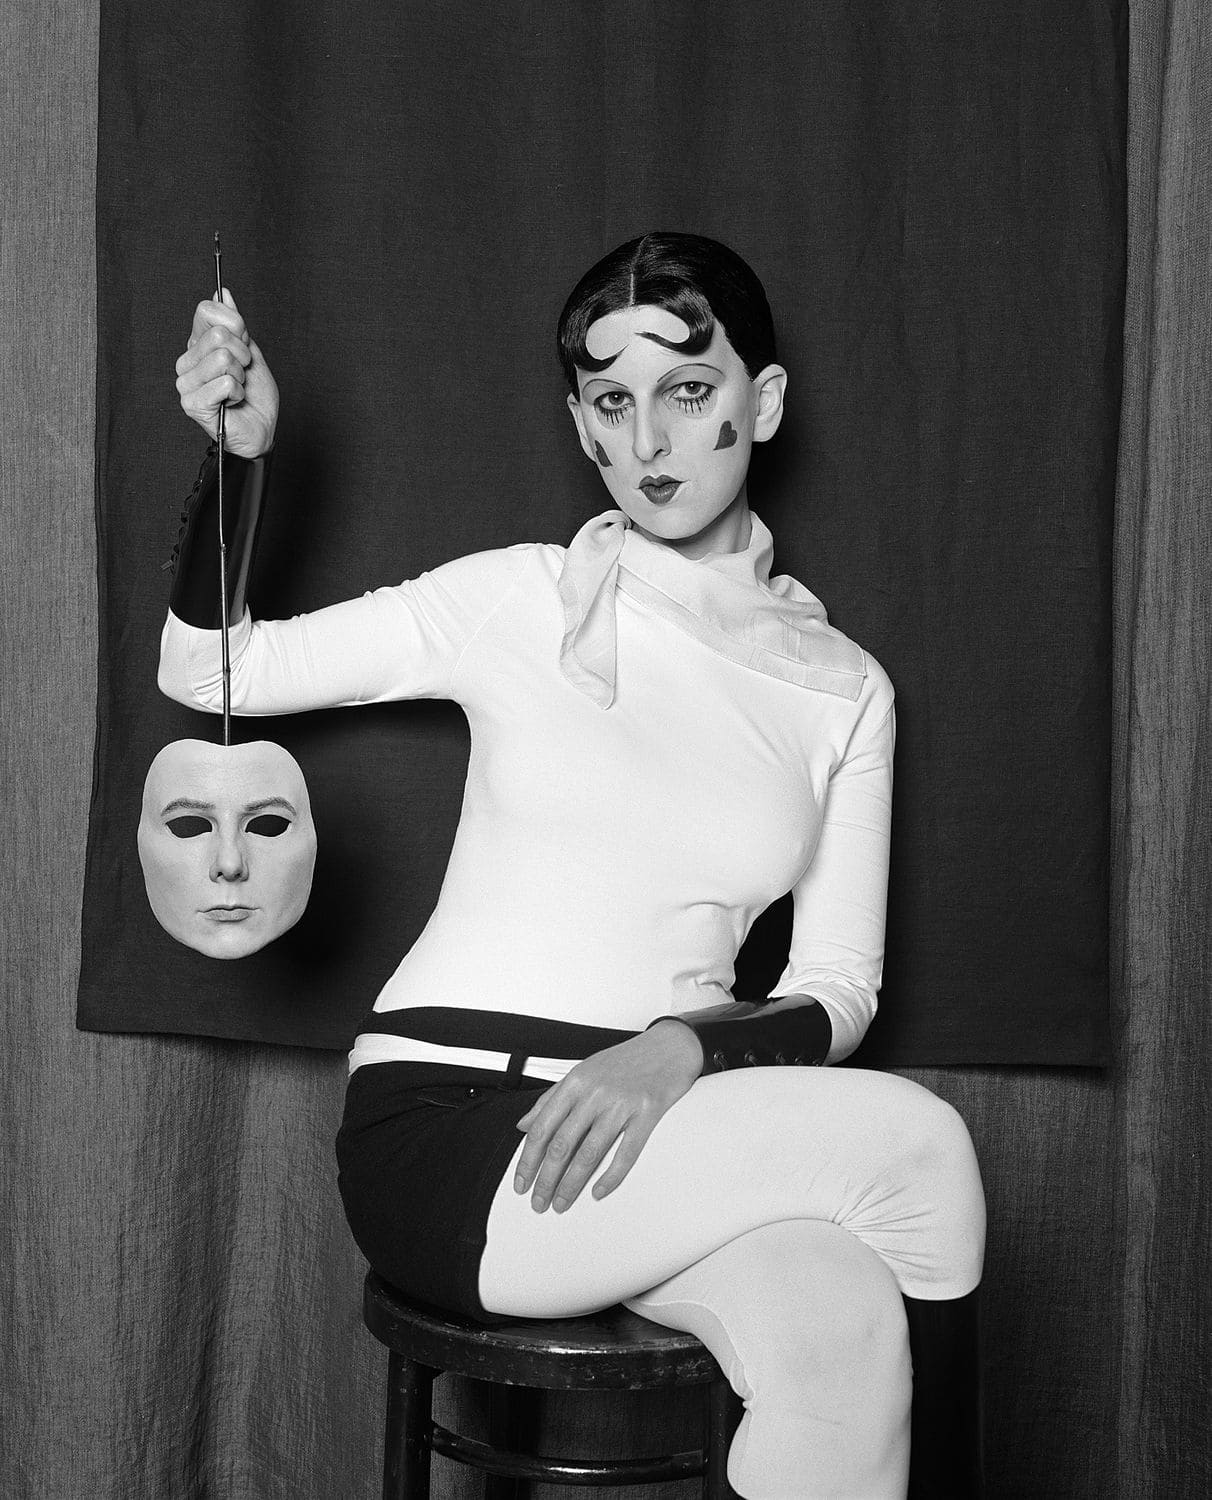 Black and white image of a young woman holding a mask